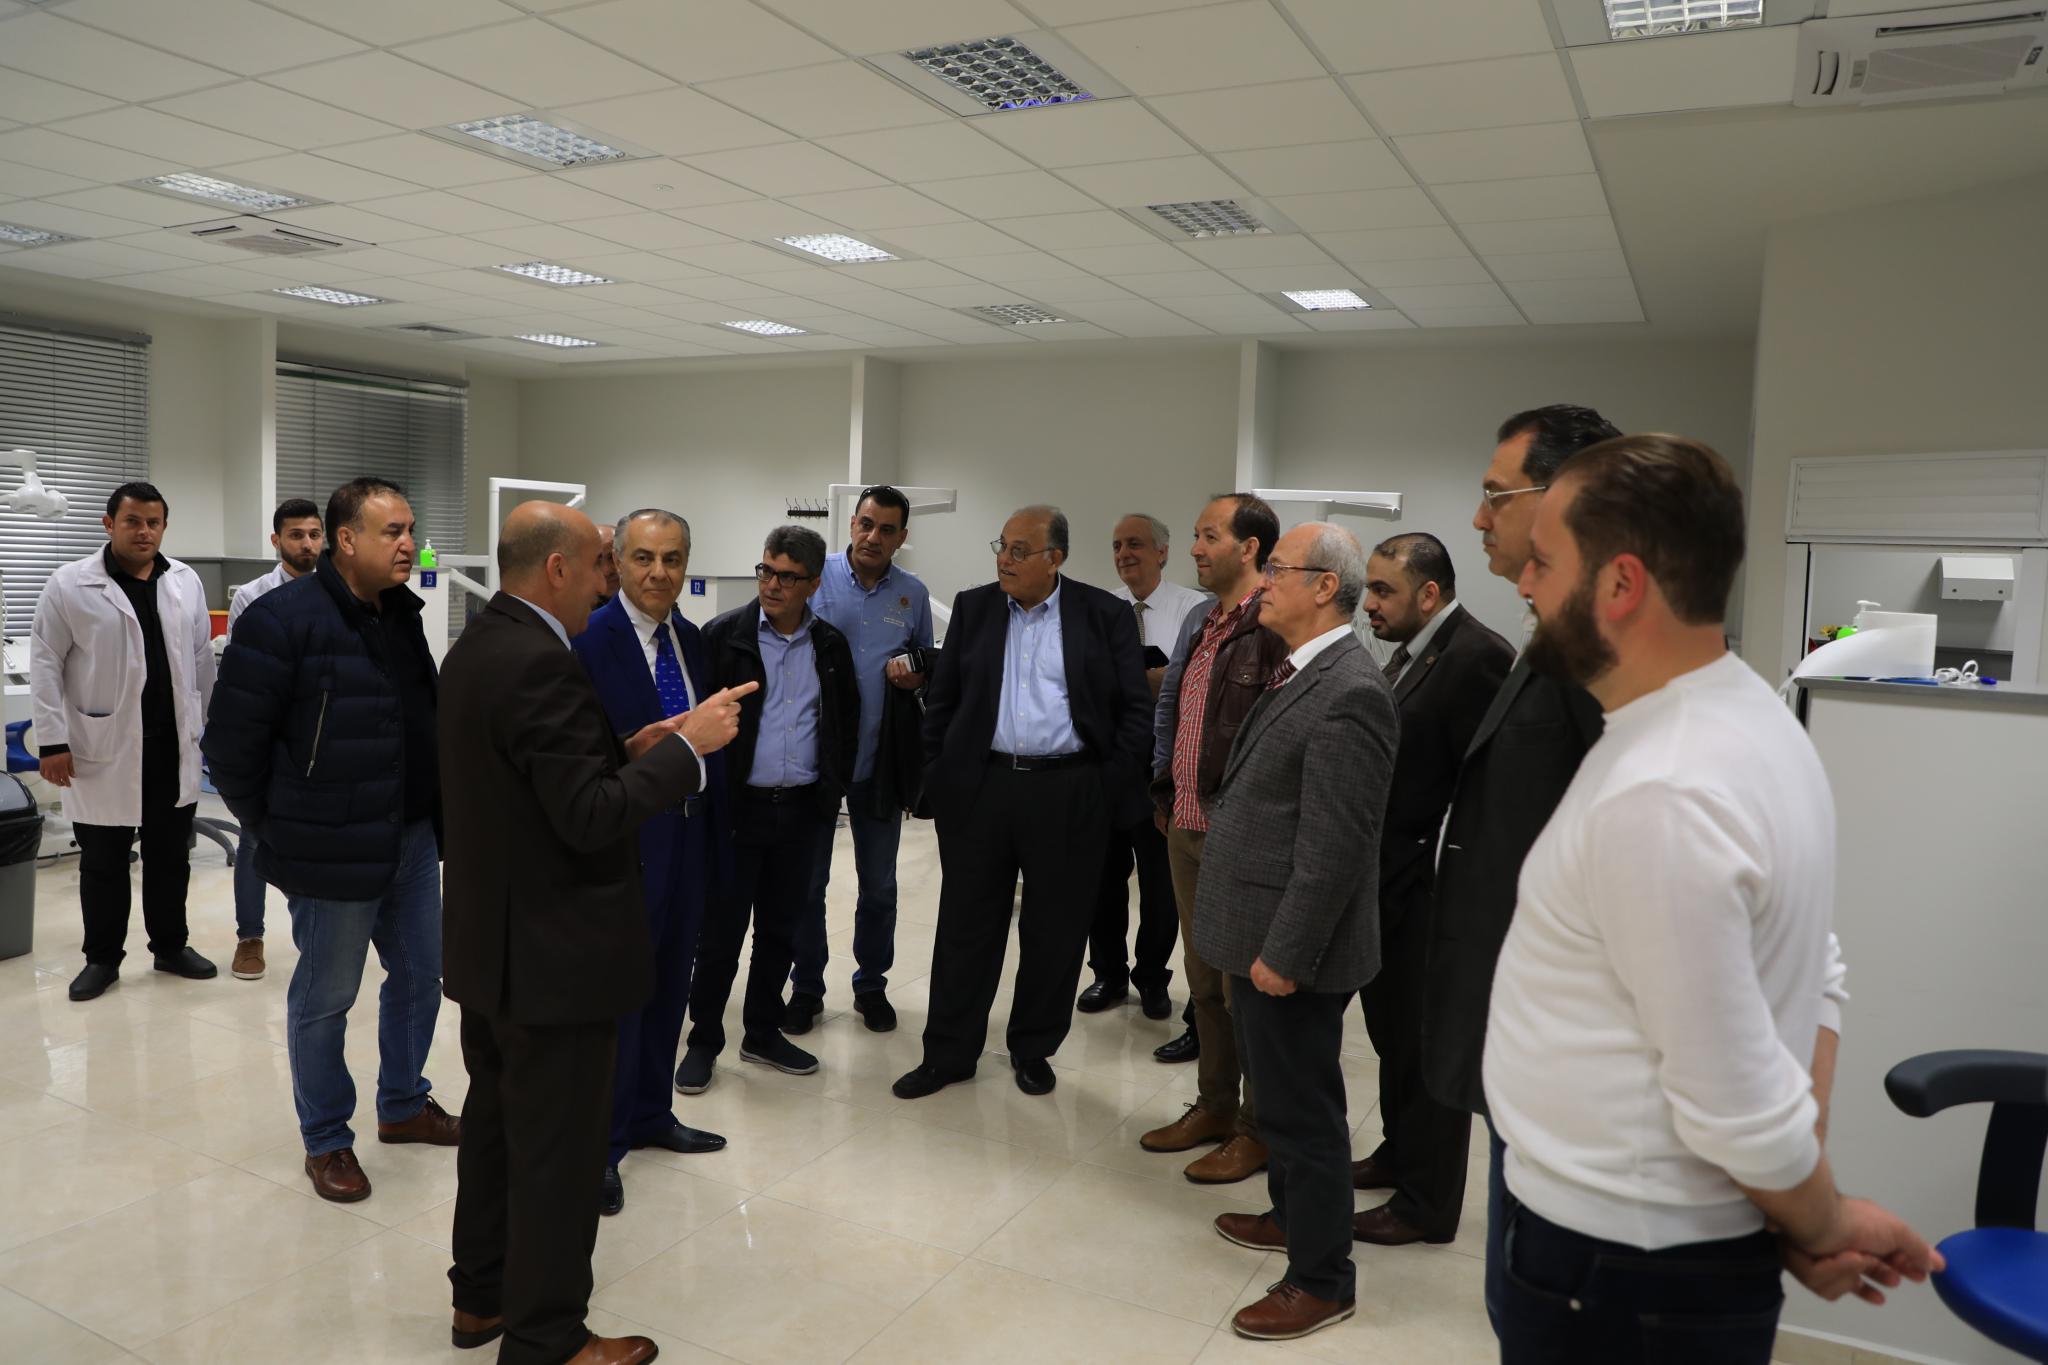 Accompanied by Eng. Zuhair Hijjawi- a Board of Directors Member, a delegation from the Palestinian Labor Council from Dubai and the Northern Emirates has visited the Arab American University.